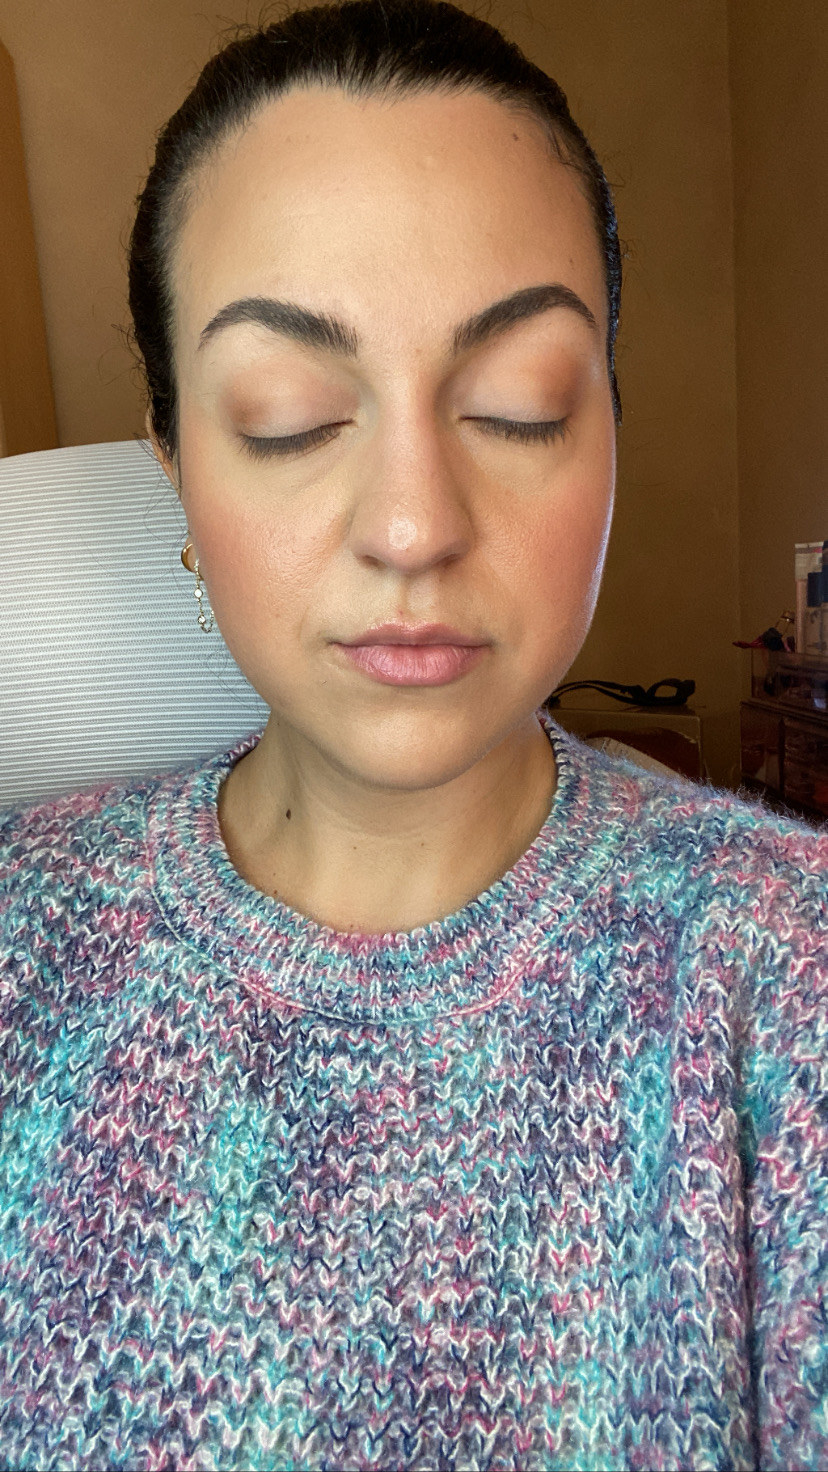 A selfie of the author with her eyes closed showing off her eye makeup